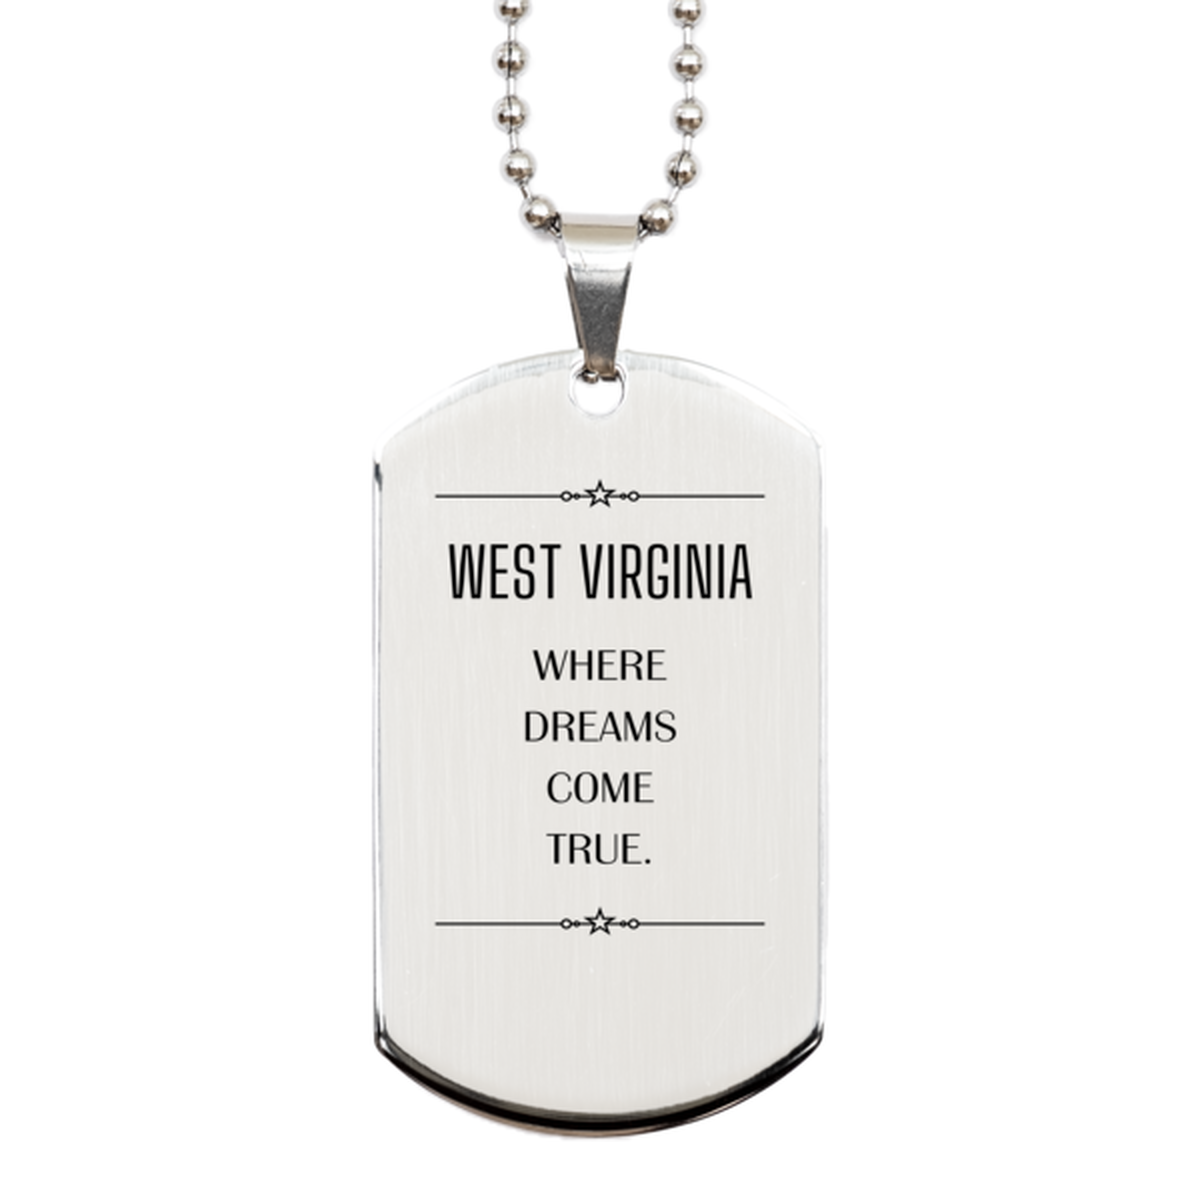 Love West Virginia State Silver Dog Tag, West Virginia Where dreams come true, Birthday Inspirational Gifts For West Virginia Men, Women, Friends